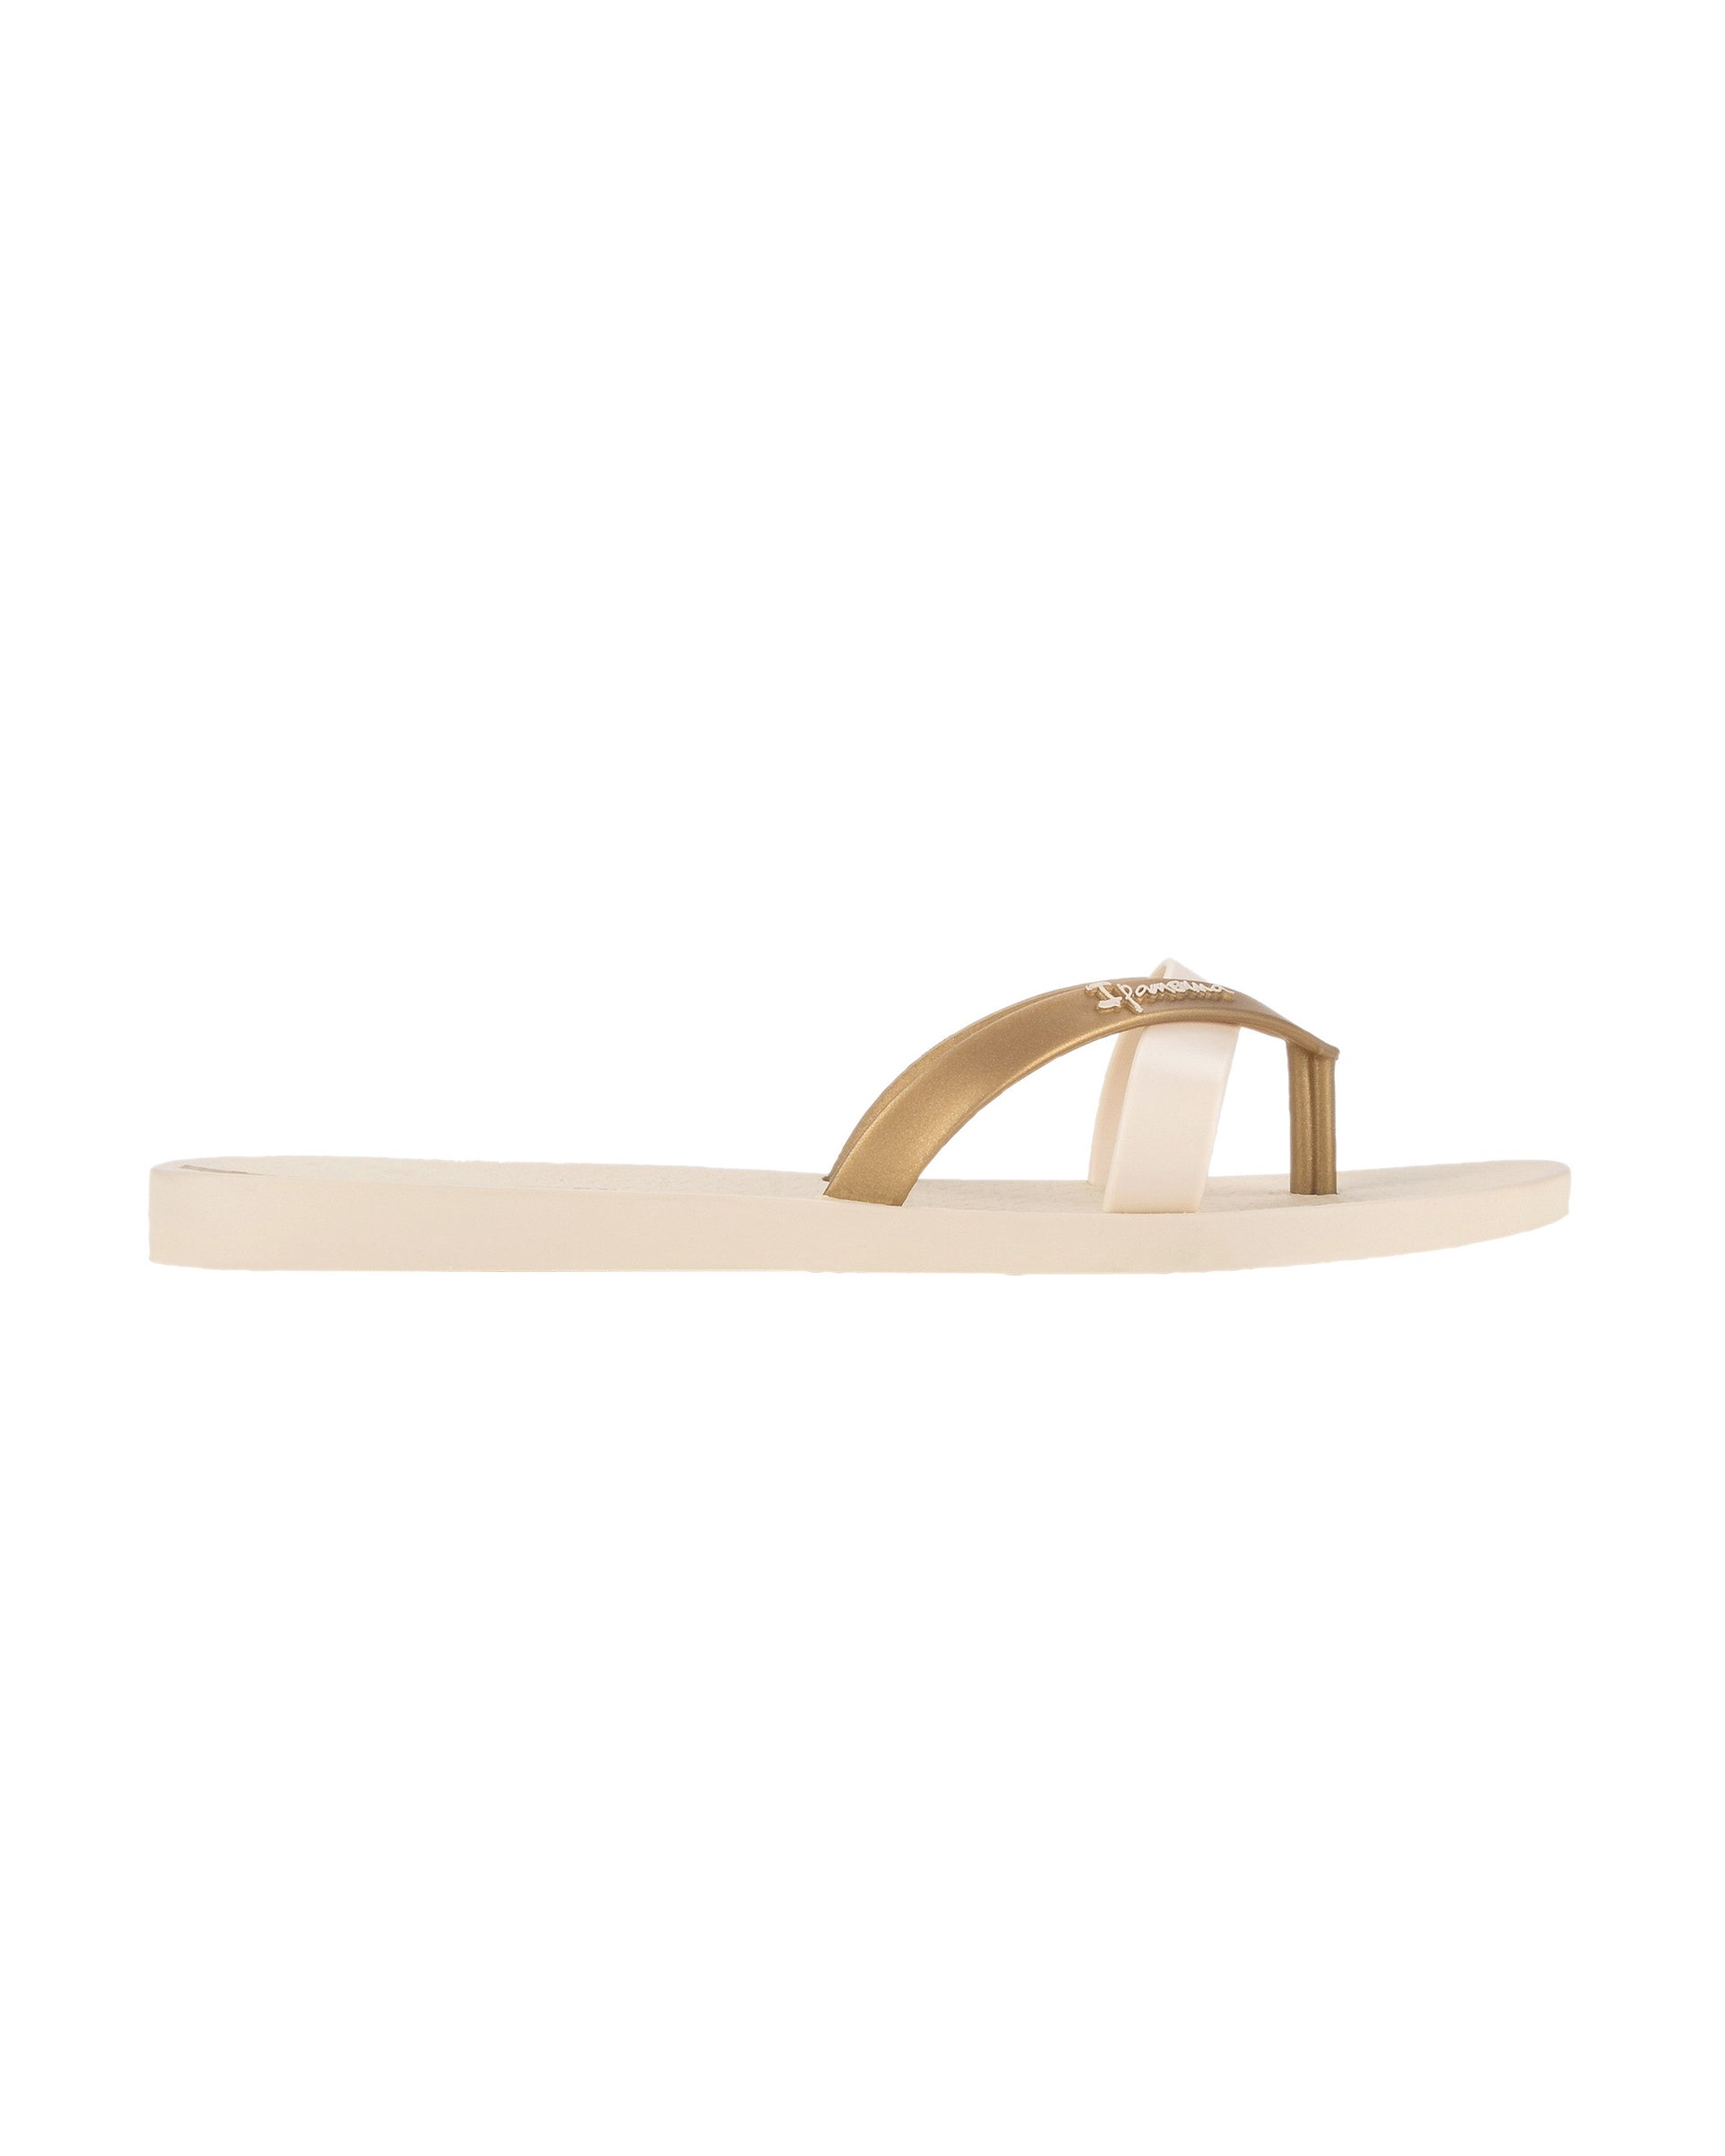 Side view of a beige and gold Ipanema Kirei women's flip flop.